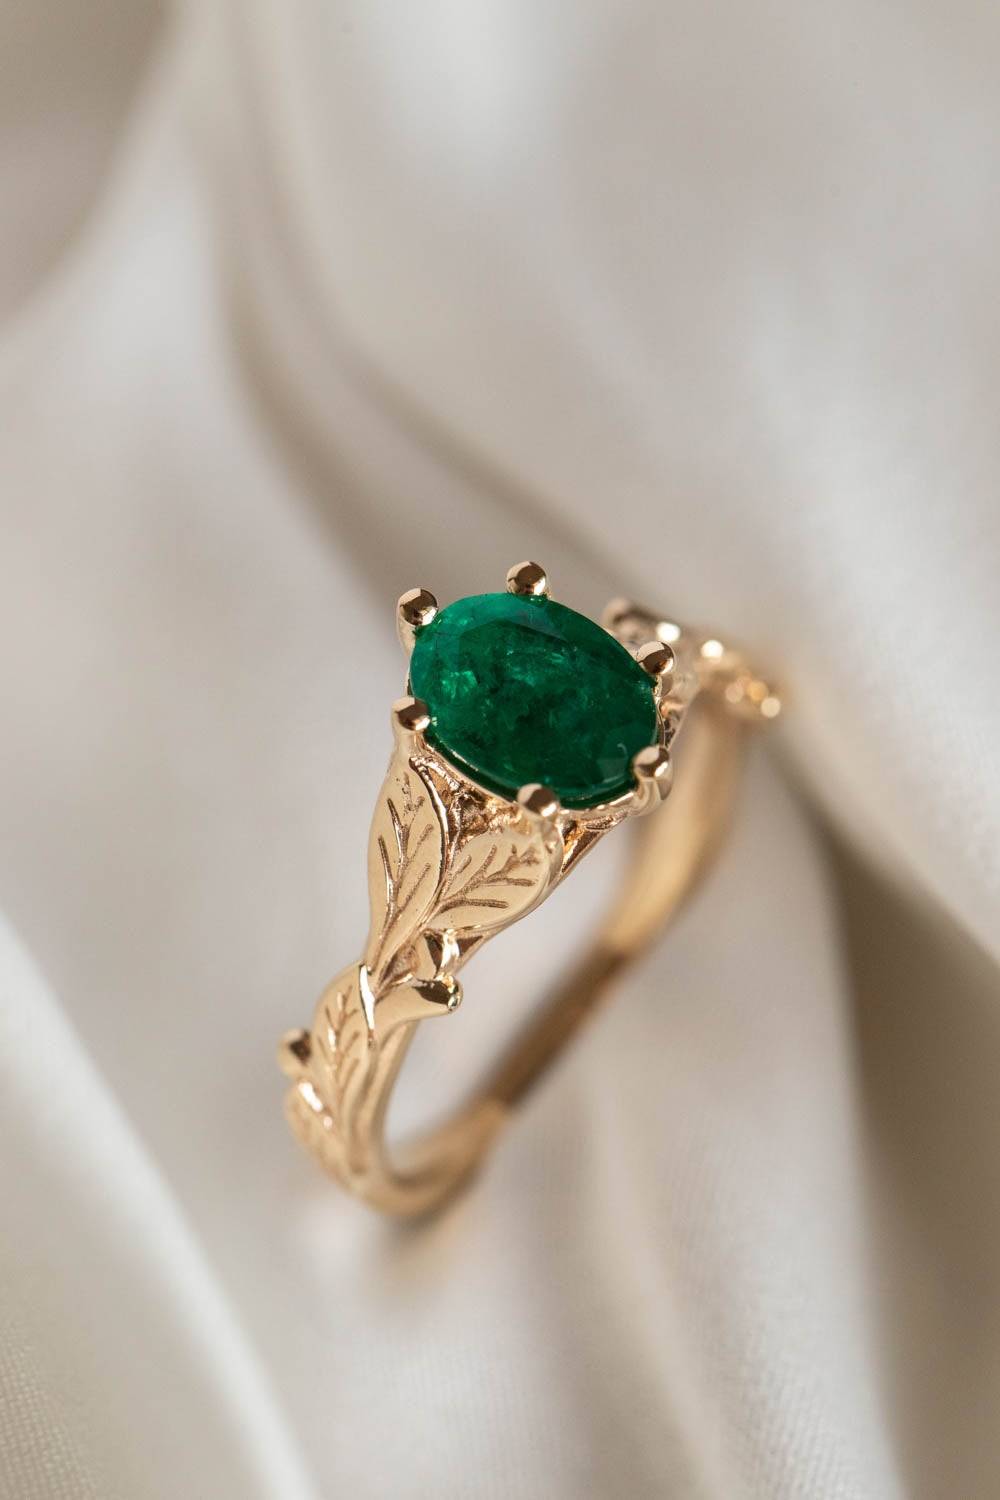 Emerald Engagement Ring With Meteorite | Jewelry by Johan - Jewelry by Johan